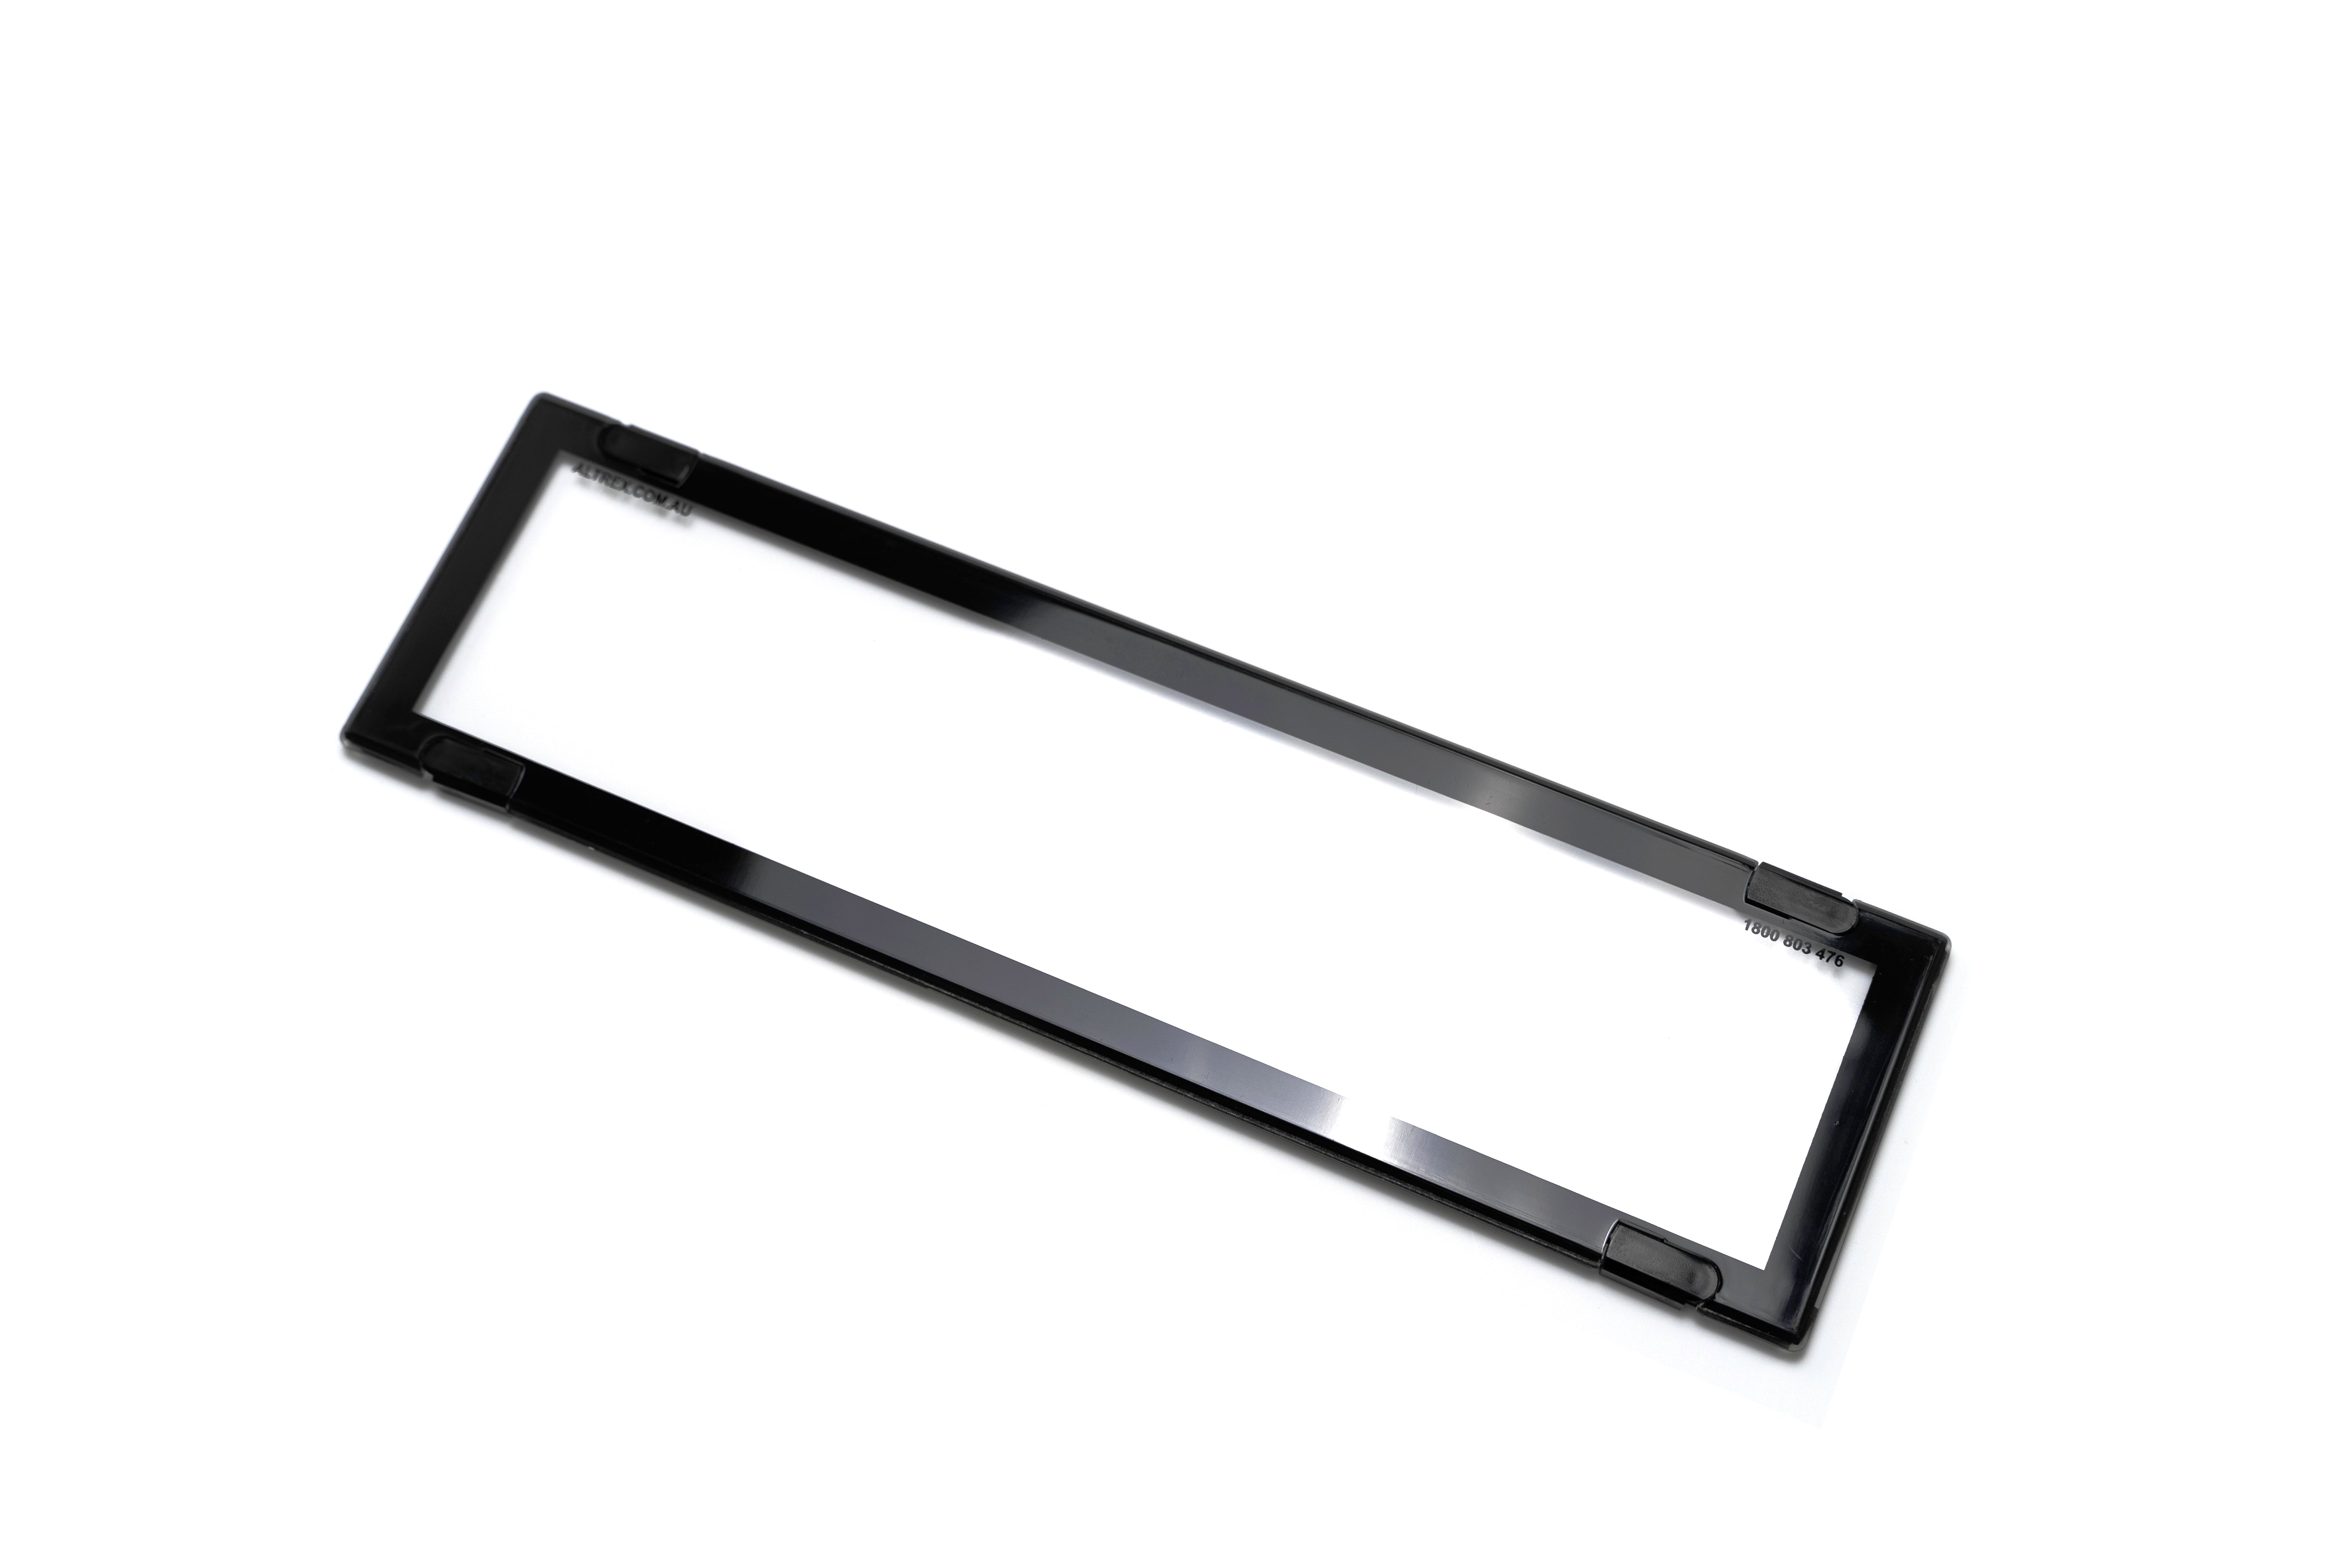 ALTREX Slimline Number Plate Cover 372mm (w) x 100mm (h)